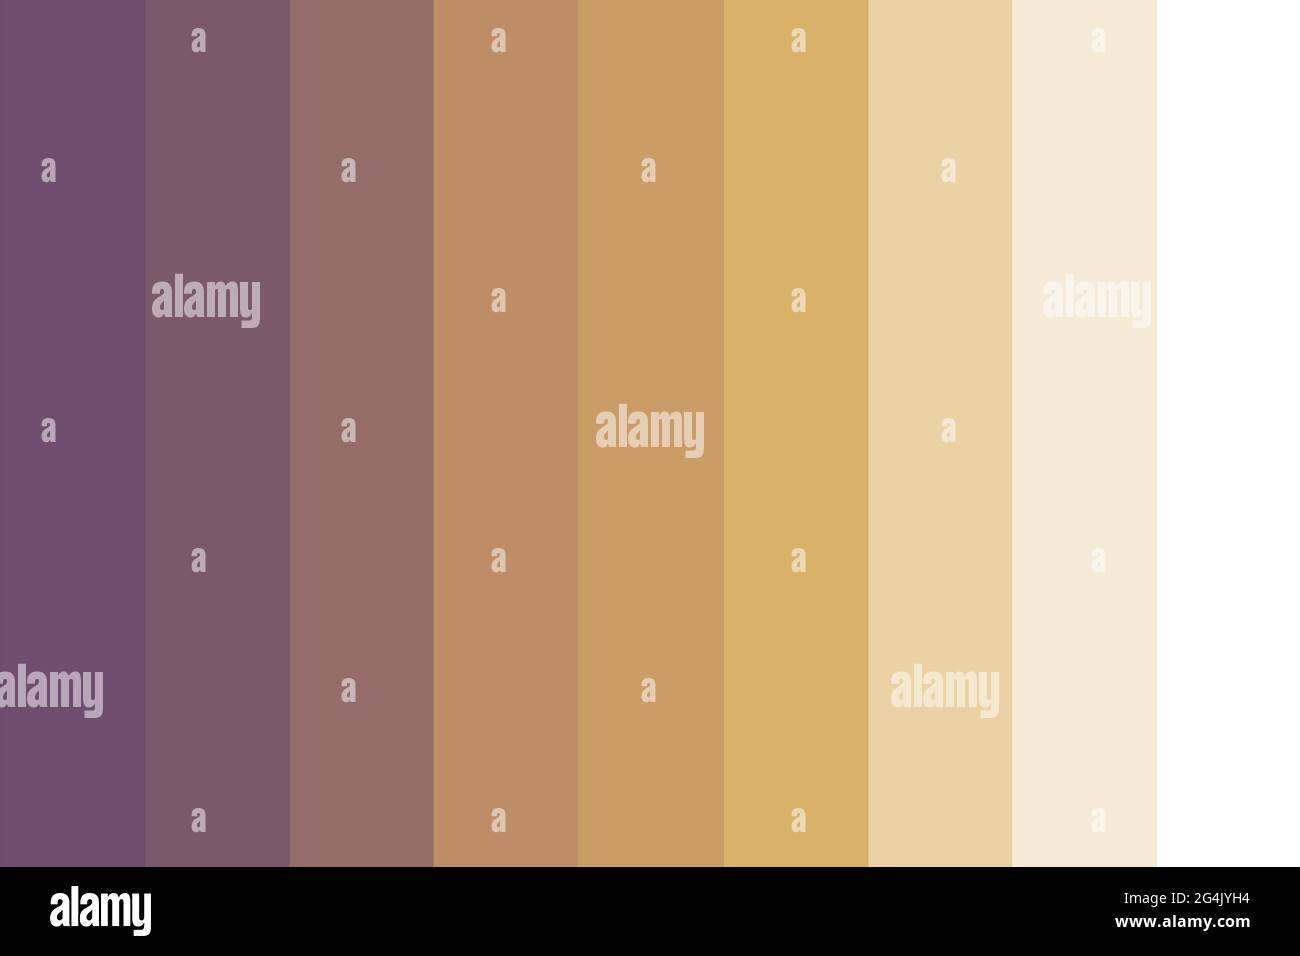 2D illustration of a warm color palette ranging from dark purple